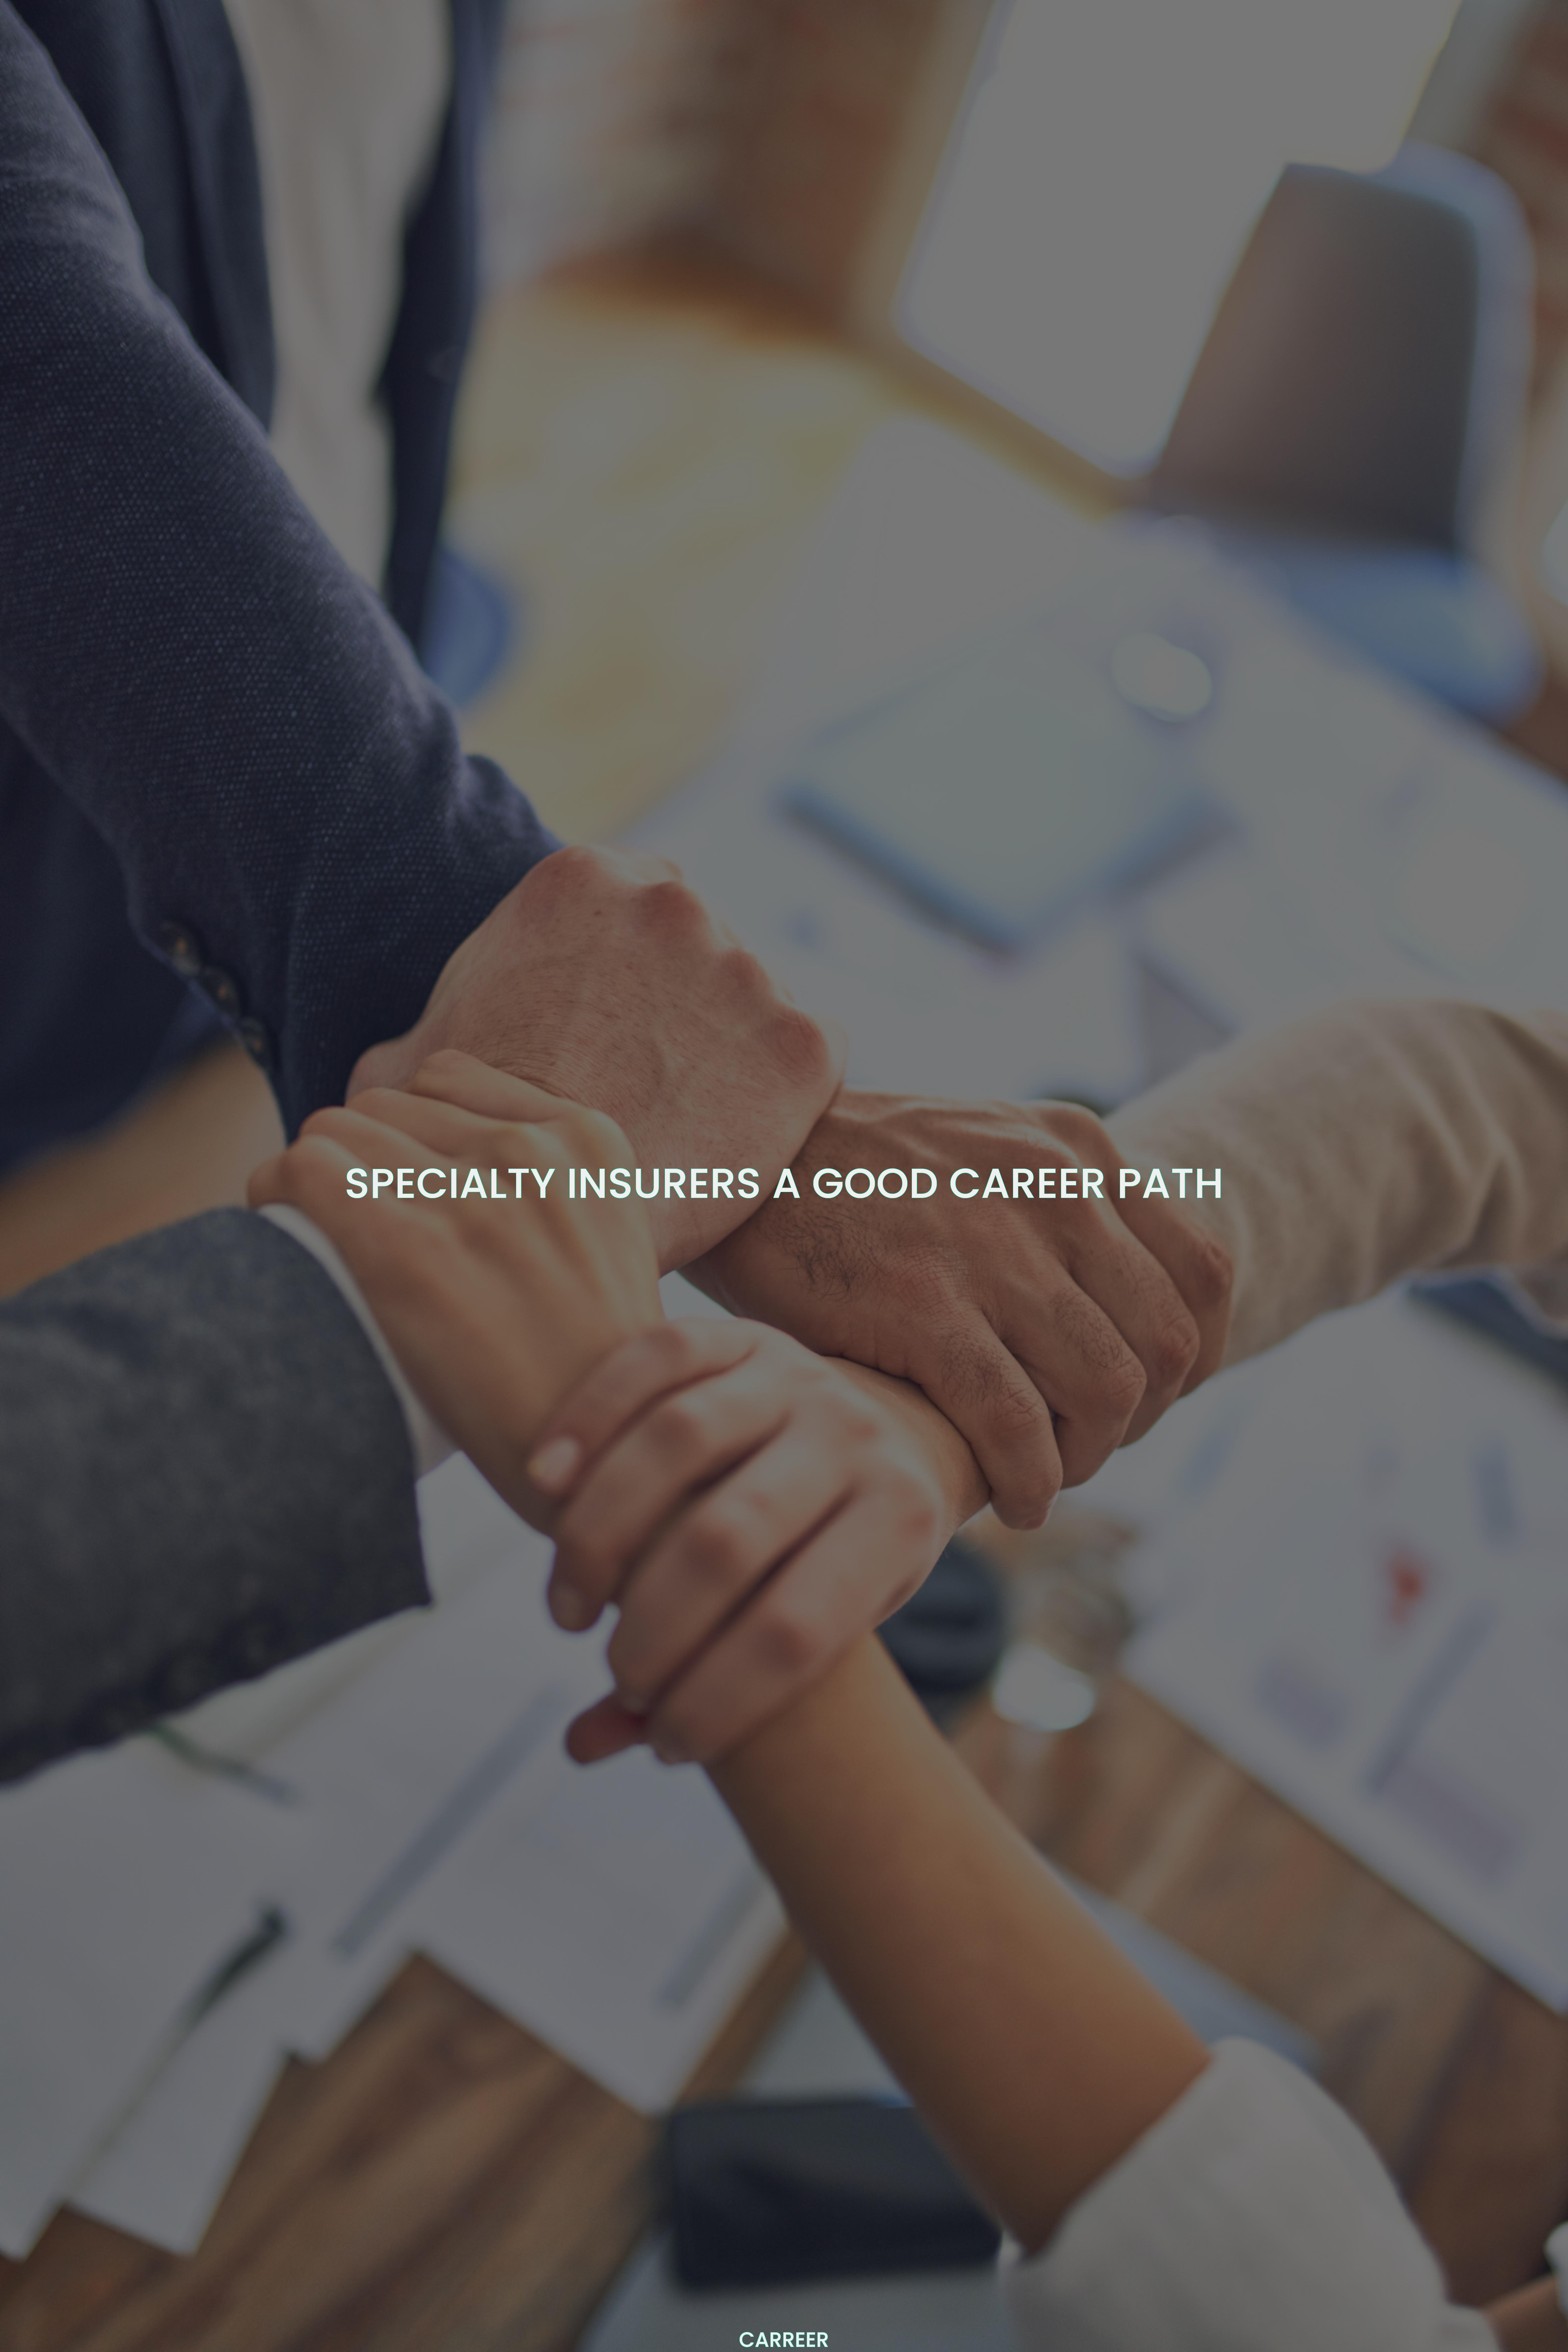 Specialty insurers a good career path